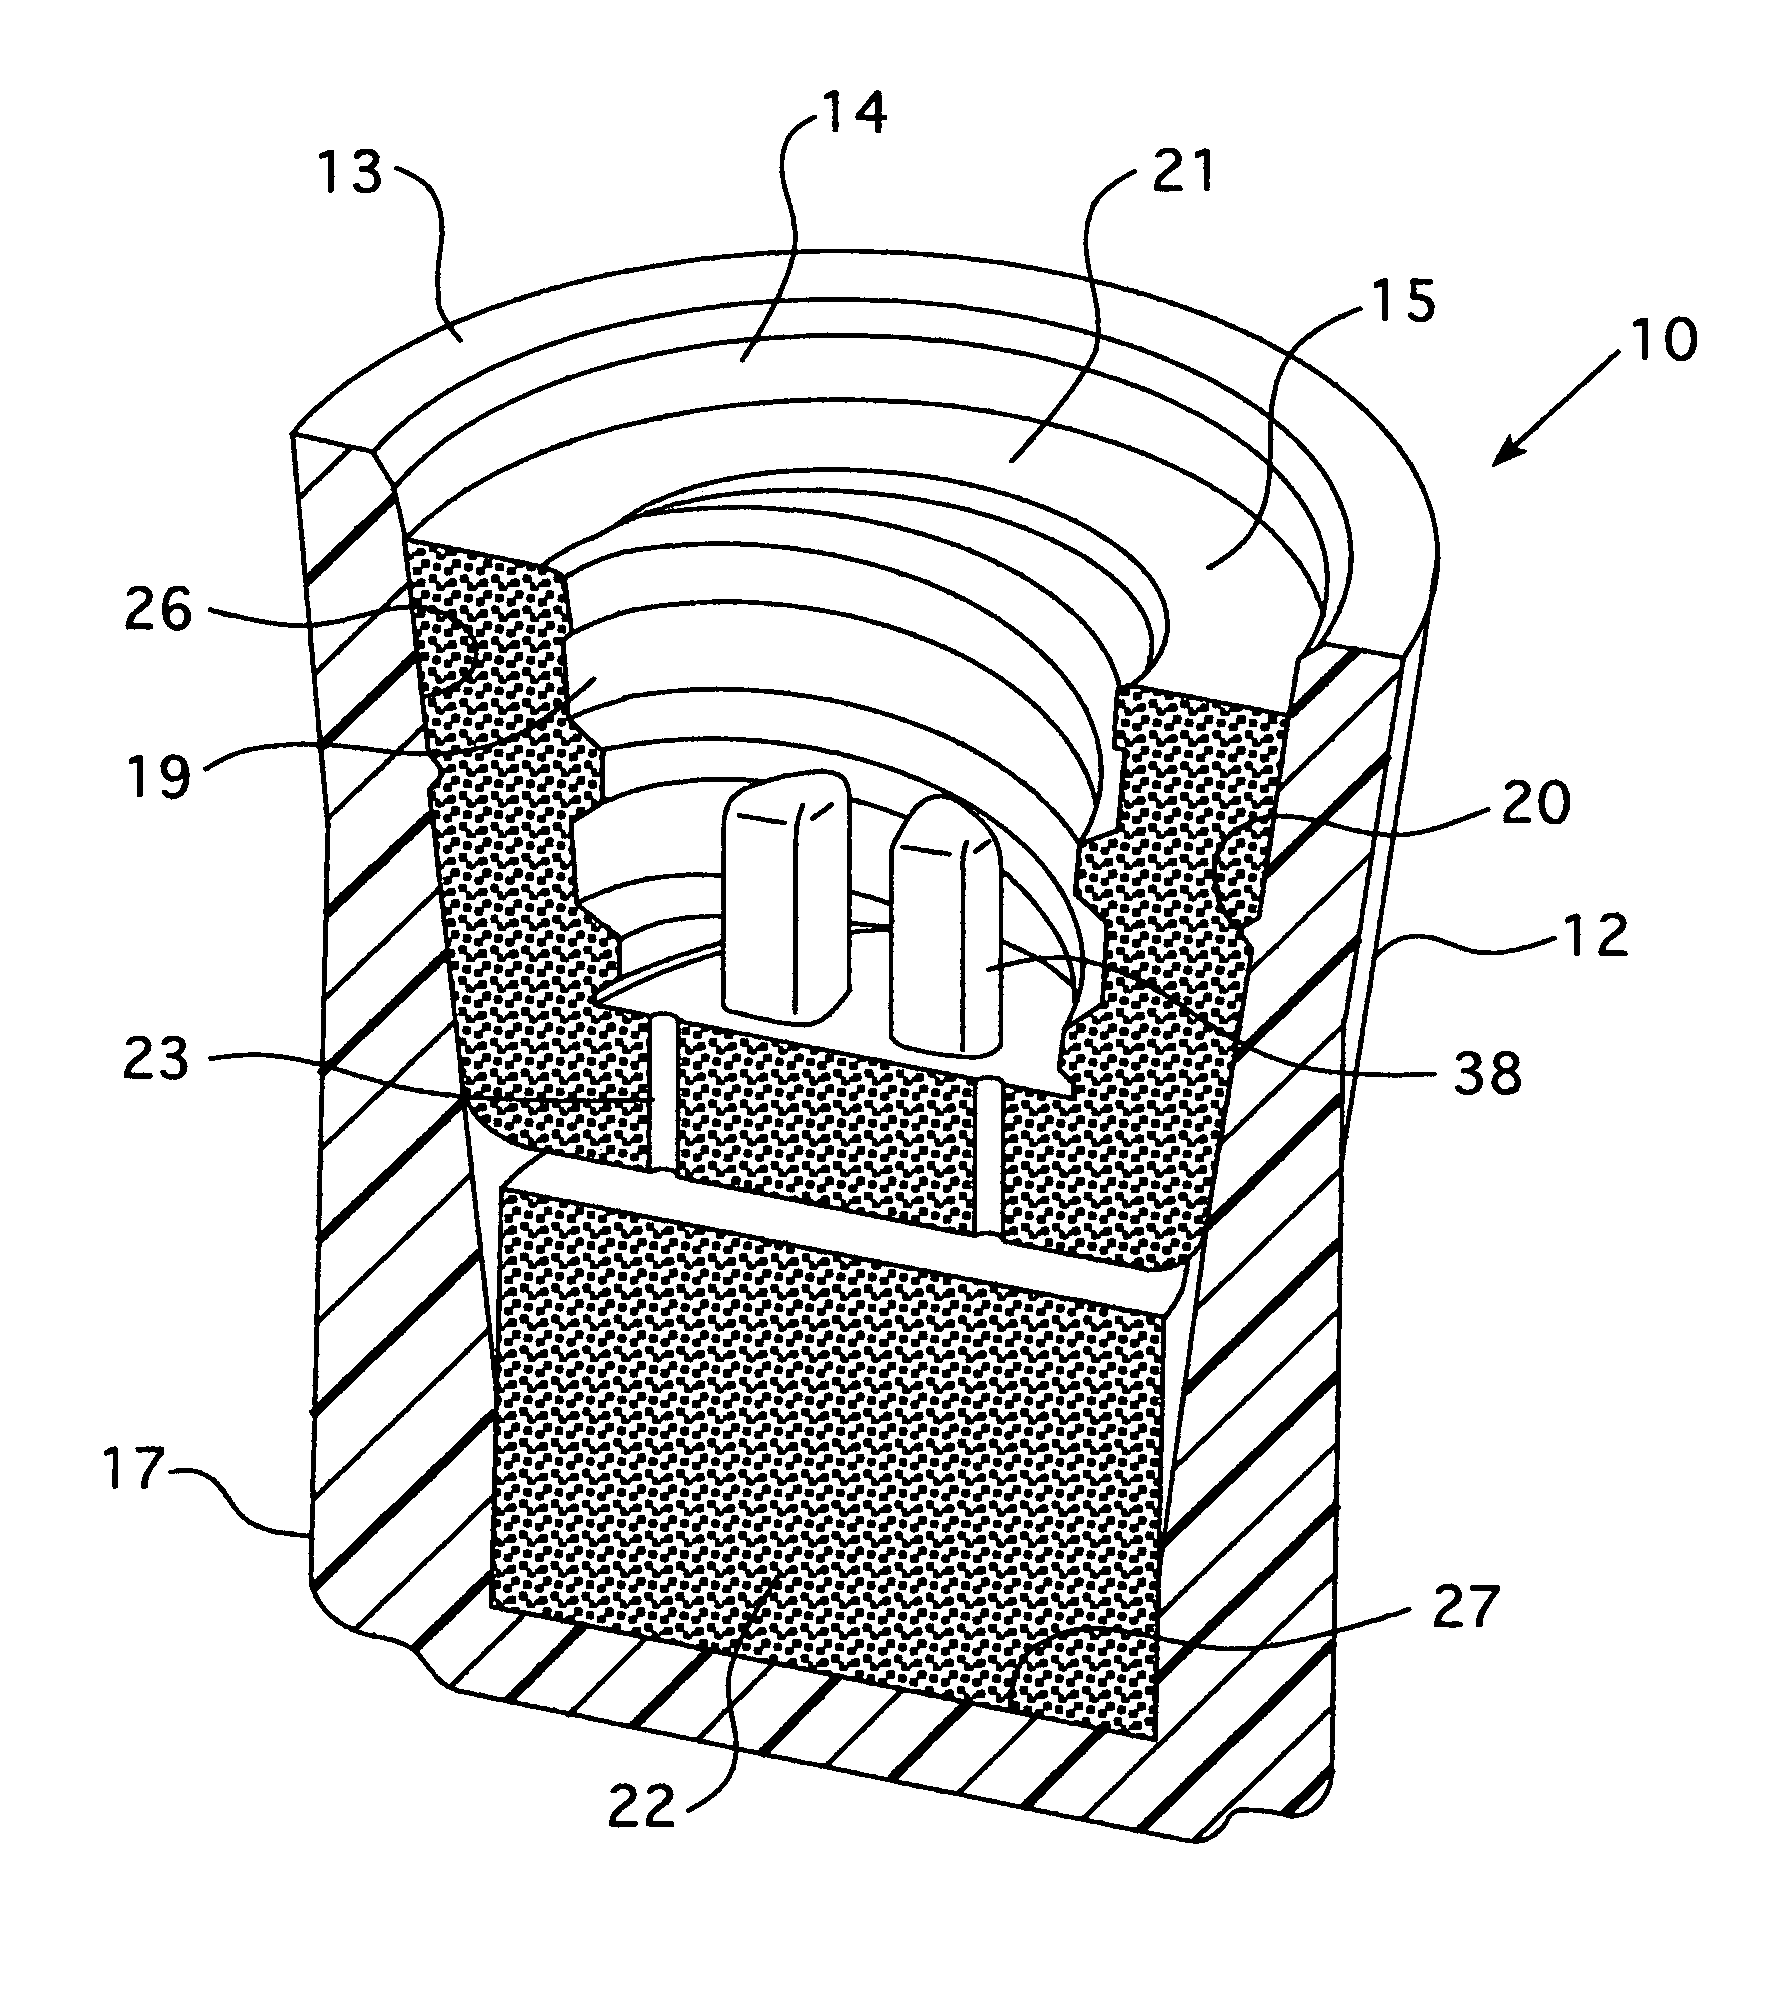 Apparatus and method for sterilizing a tubular medical line port